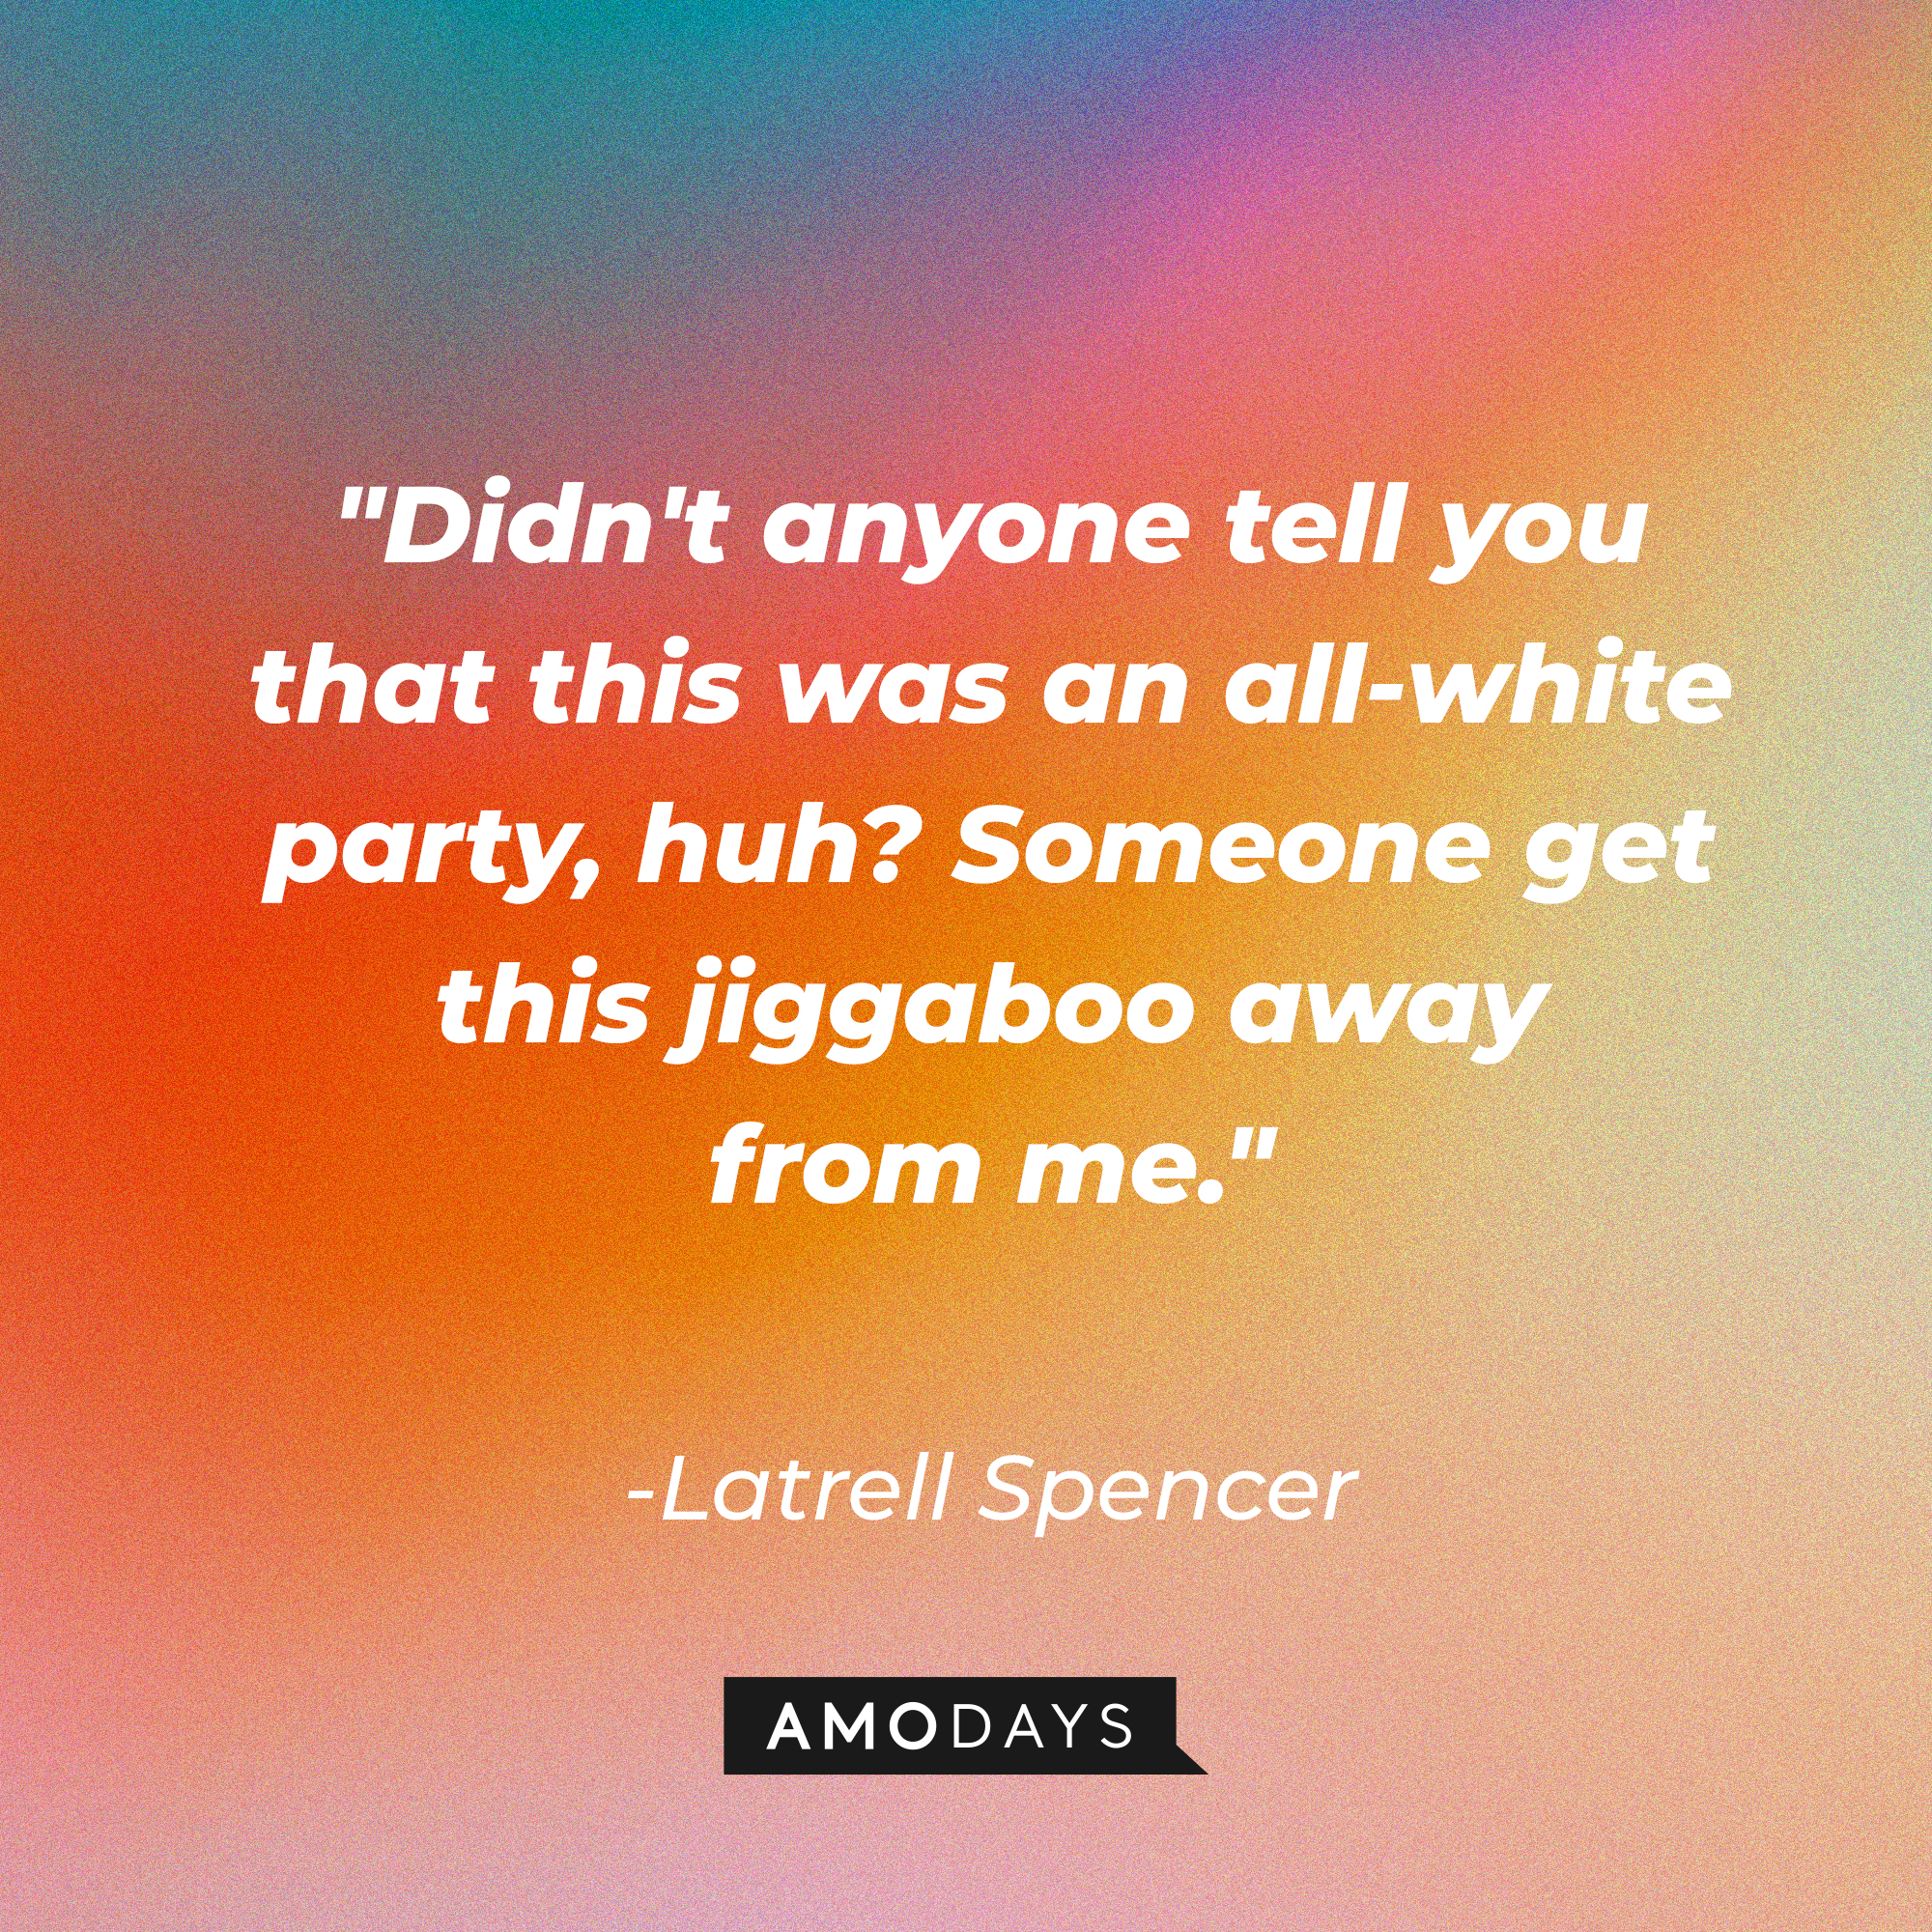 Latrell Spencer's quote: "Didn't anyone tell you that this was an all-white party, huh? Someone get this jiggaboo away from me." | Source: Amodays